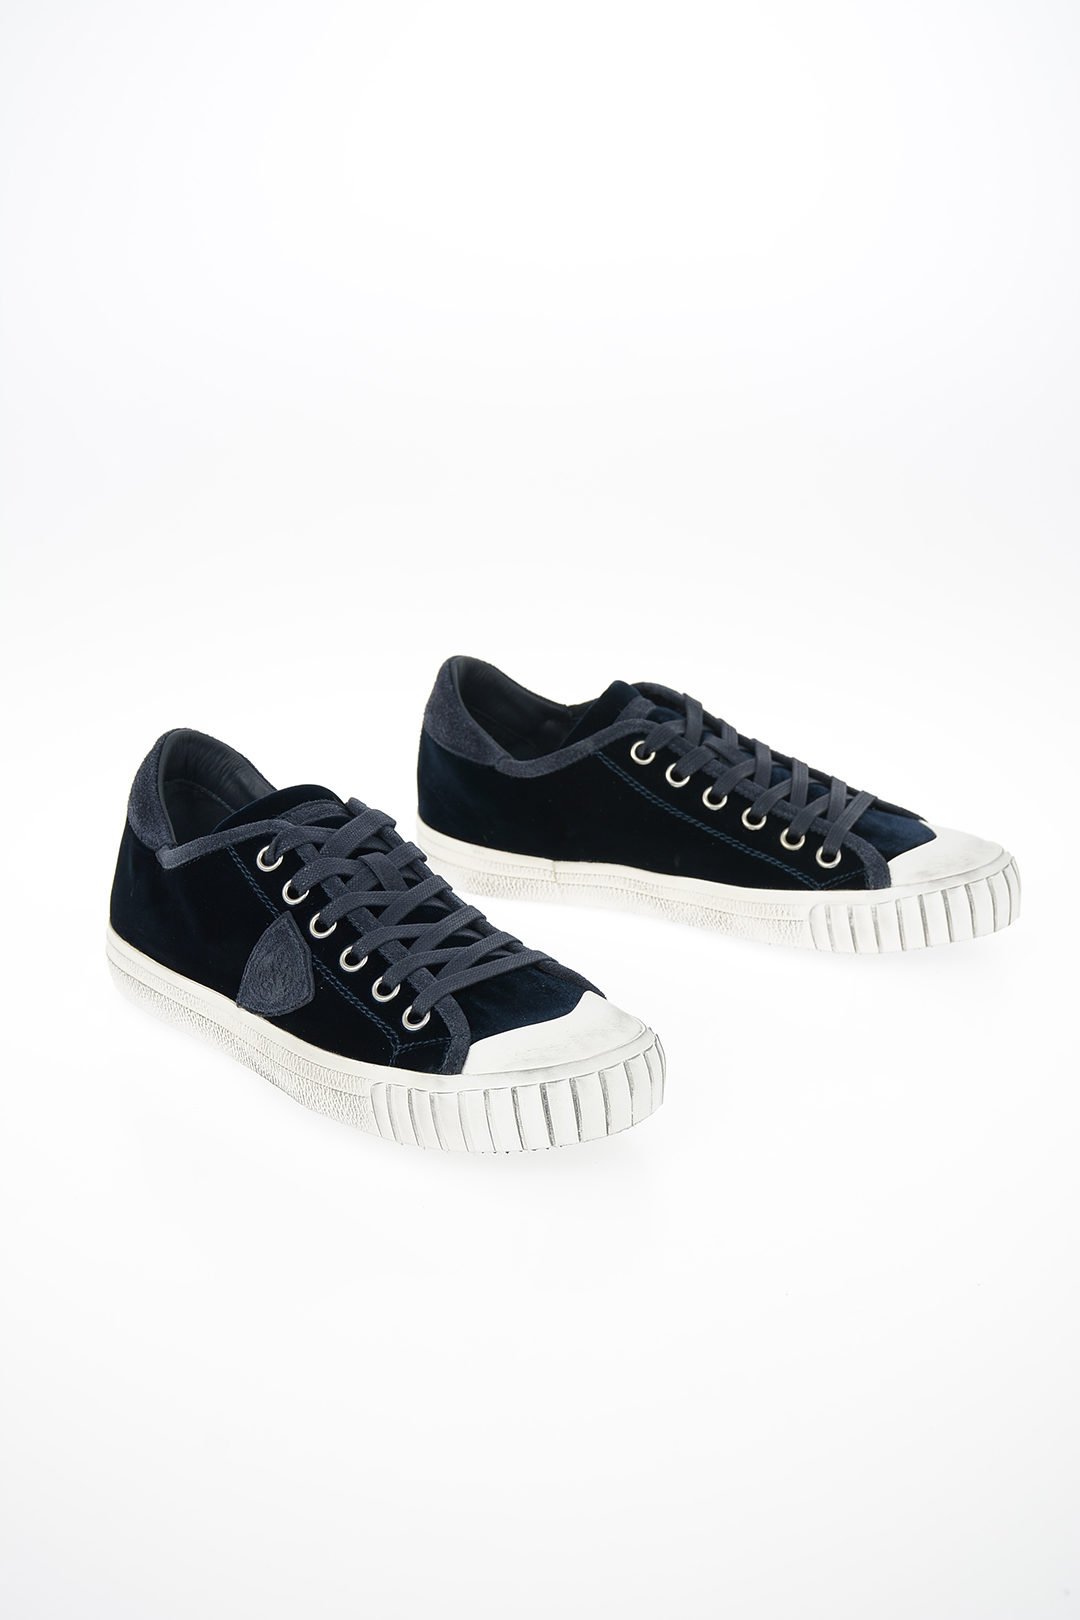 Philippe Model Paris Chenille GARE Sneakers men - Glamood Outlet